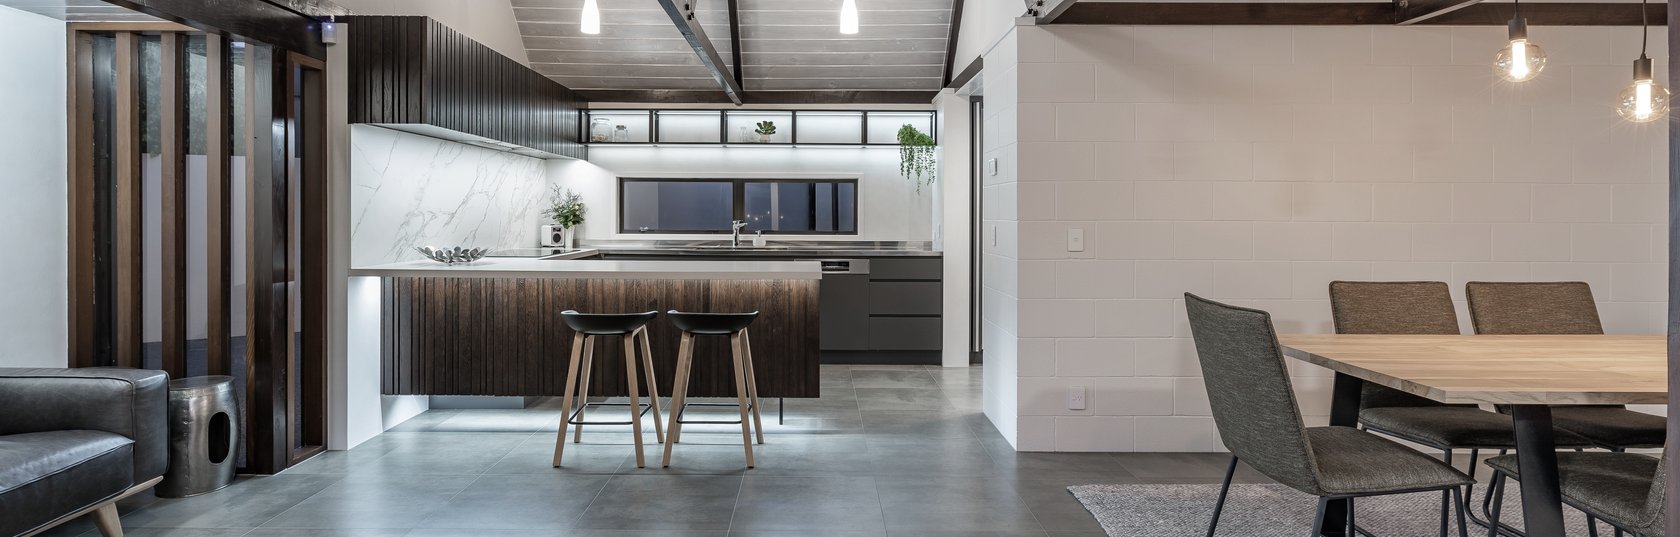 Innovative solutions star in a beautiful Fyfe kitchen